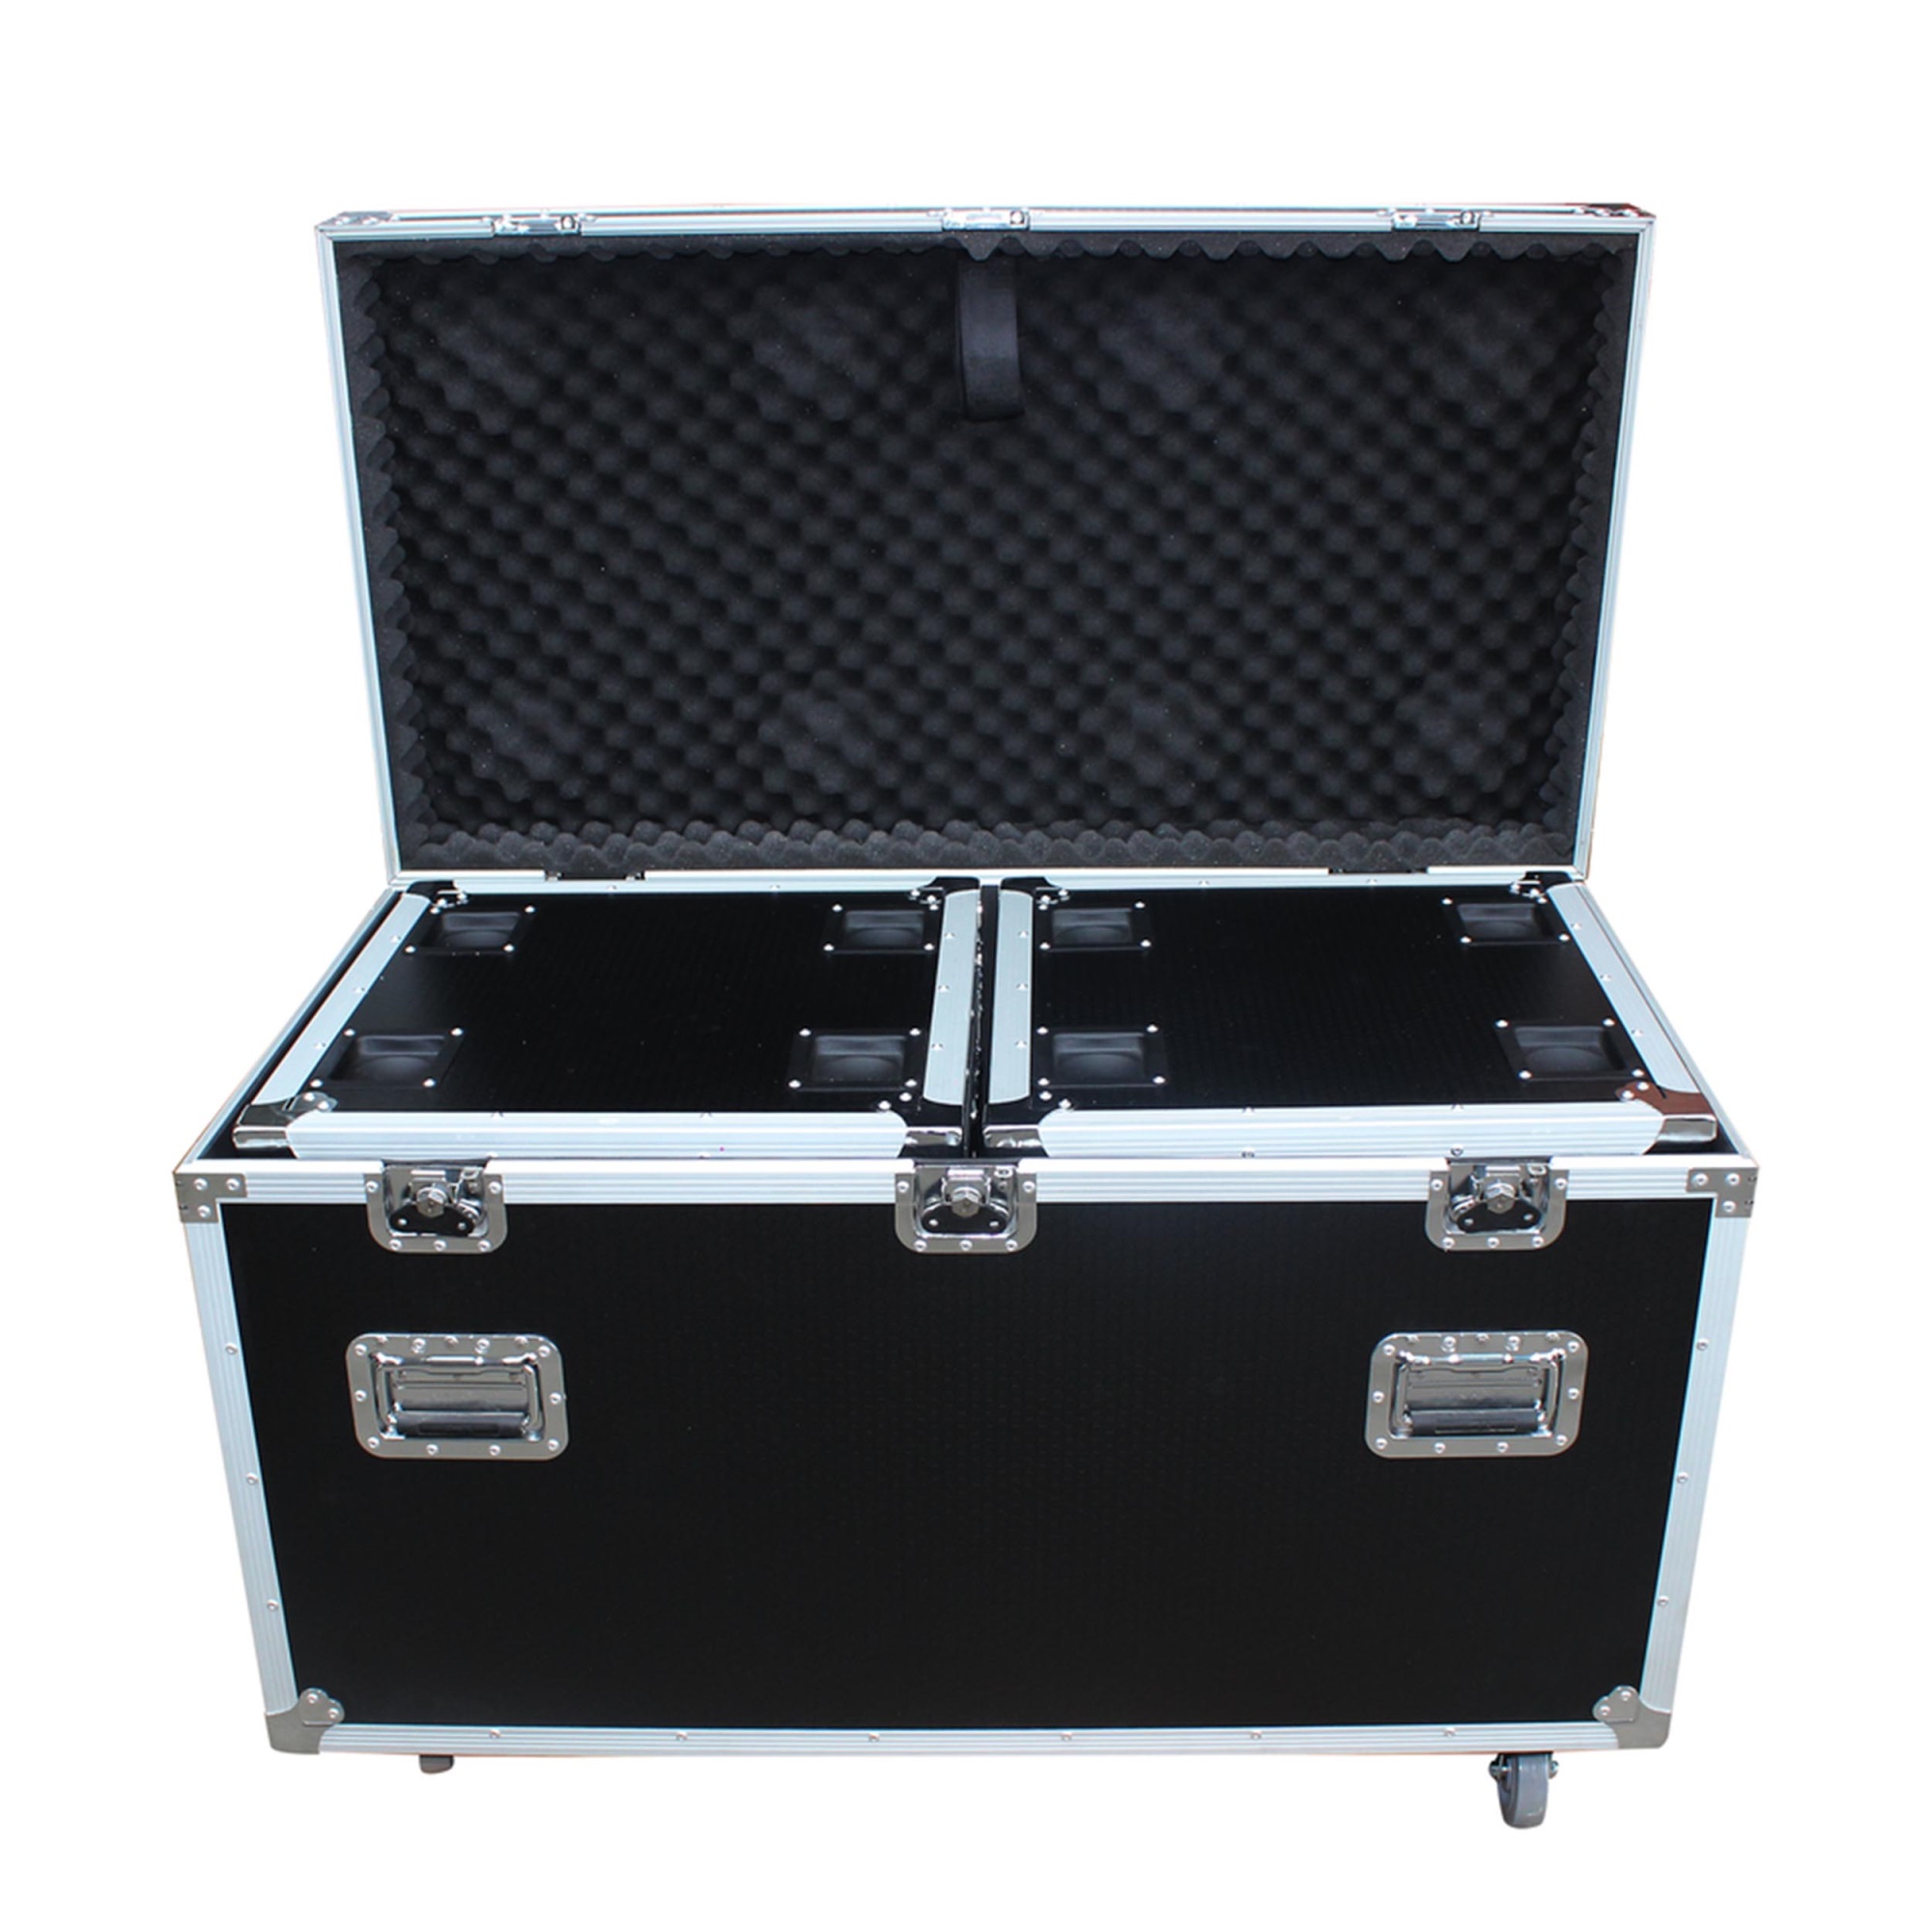 ProX XS-UTL3PKG 3 Case Package - Utility Storage ATA Style Road Cases 1 Large and 2 Half Size